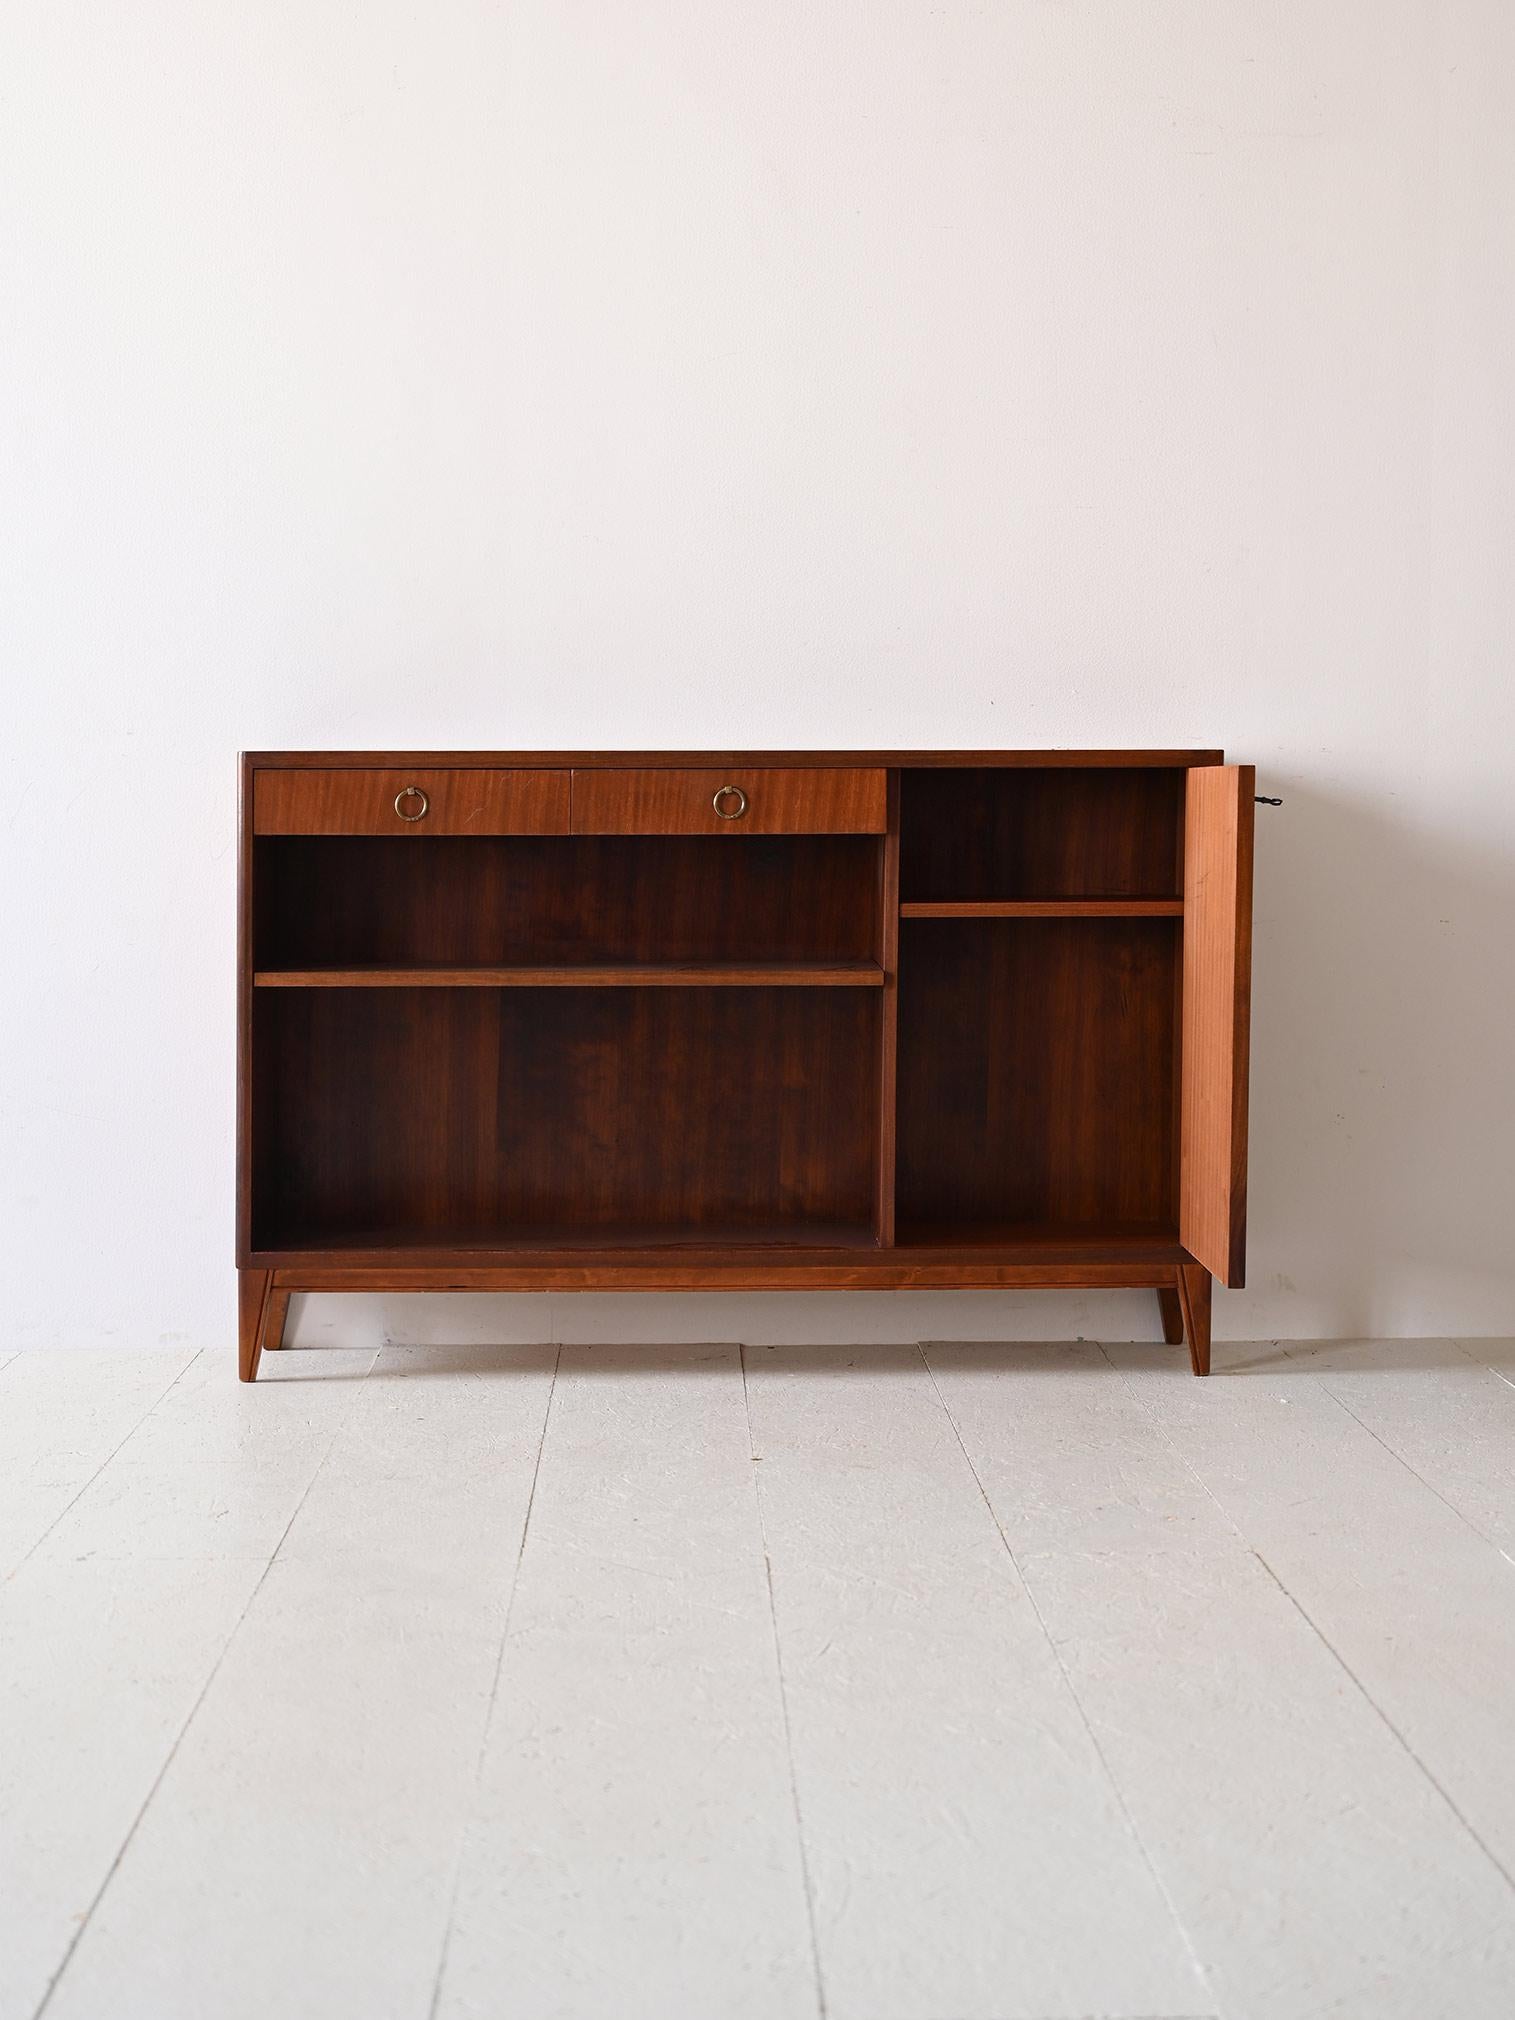 Mahogany sideboard with two drawers and lockable hinged door.

A piece that reflects the sophistication of mid-century design through its modern lines and retro flavor. The drawers provide an elegant solution for storing everyday items, while the